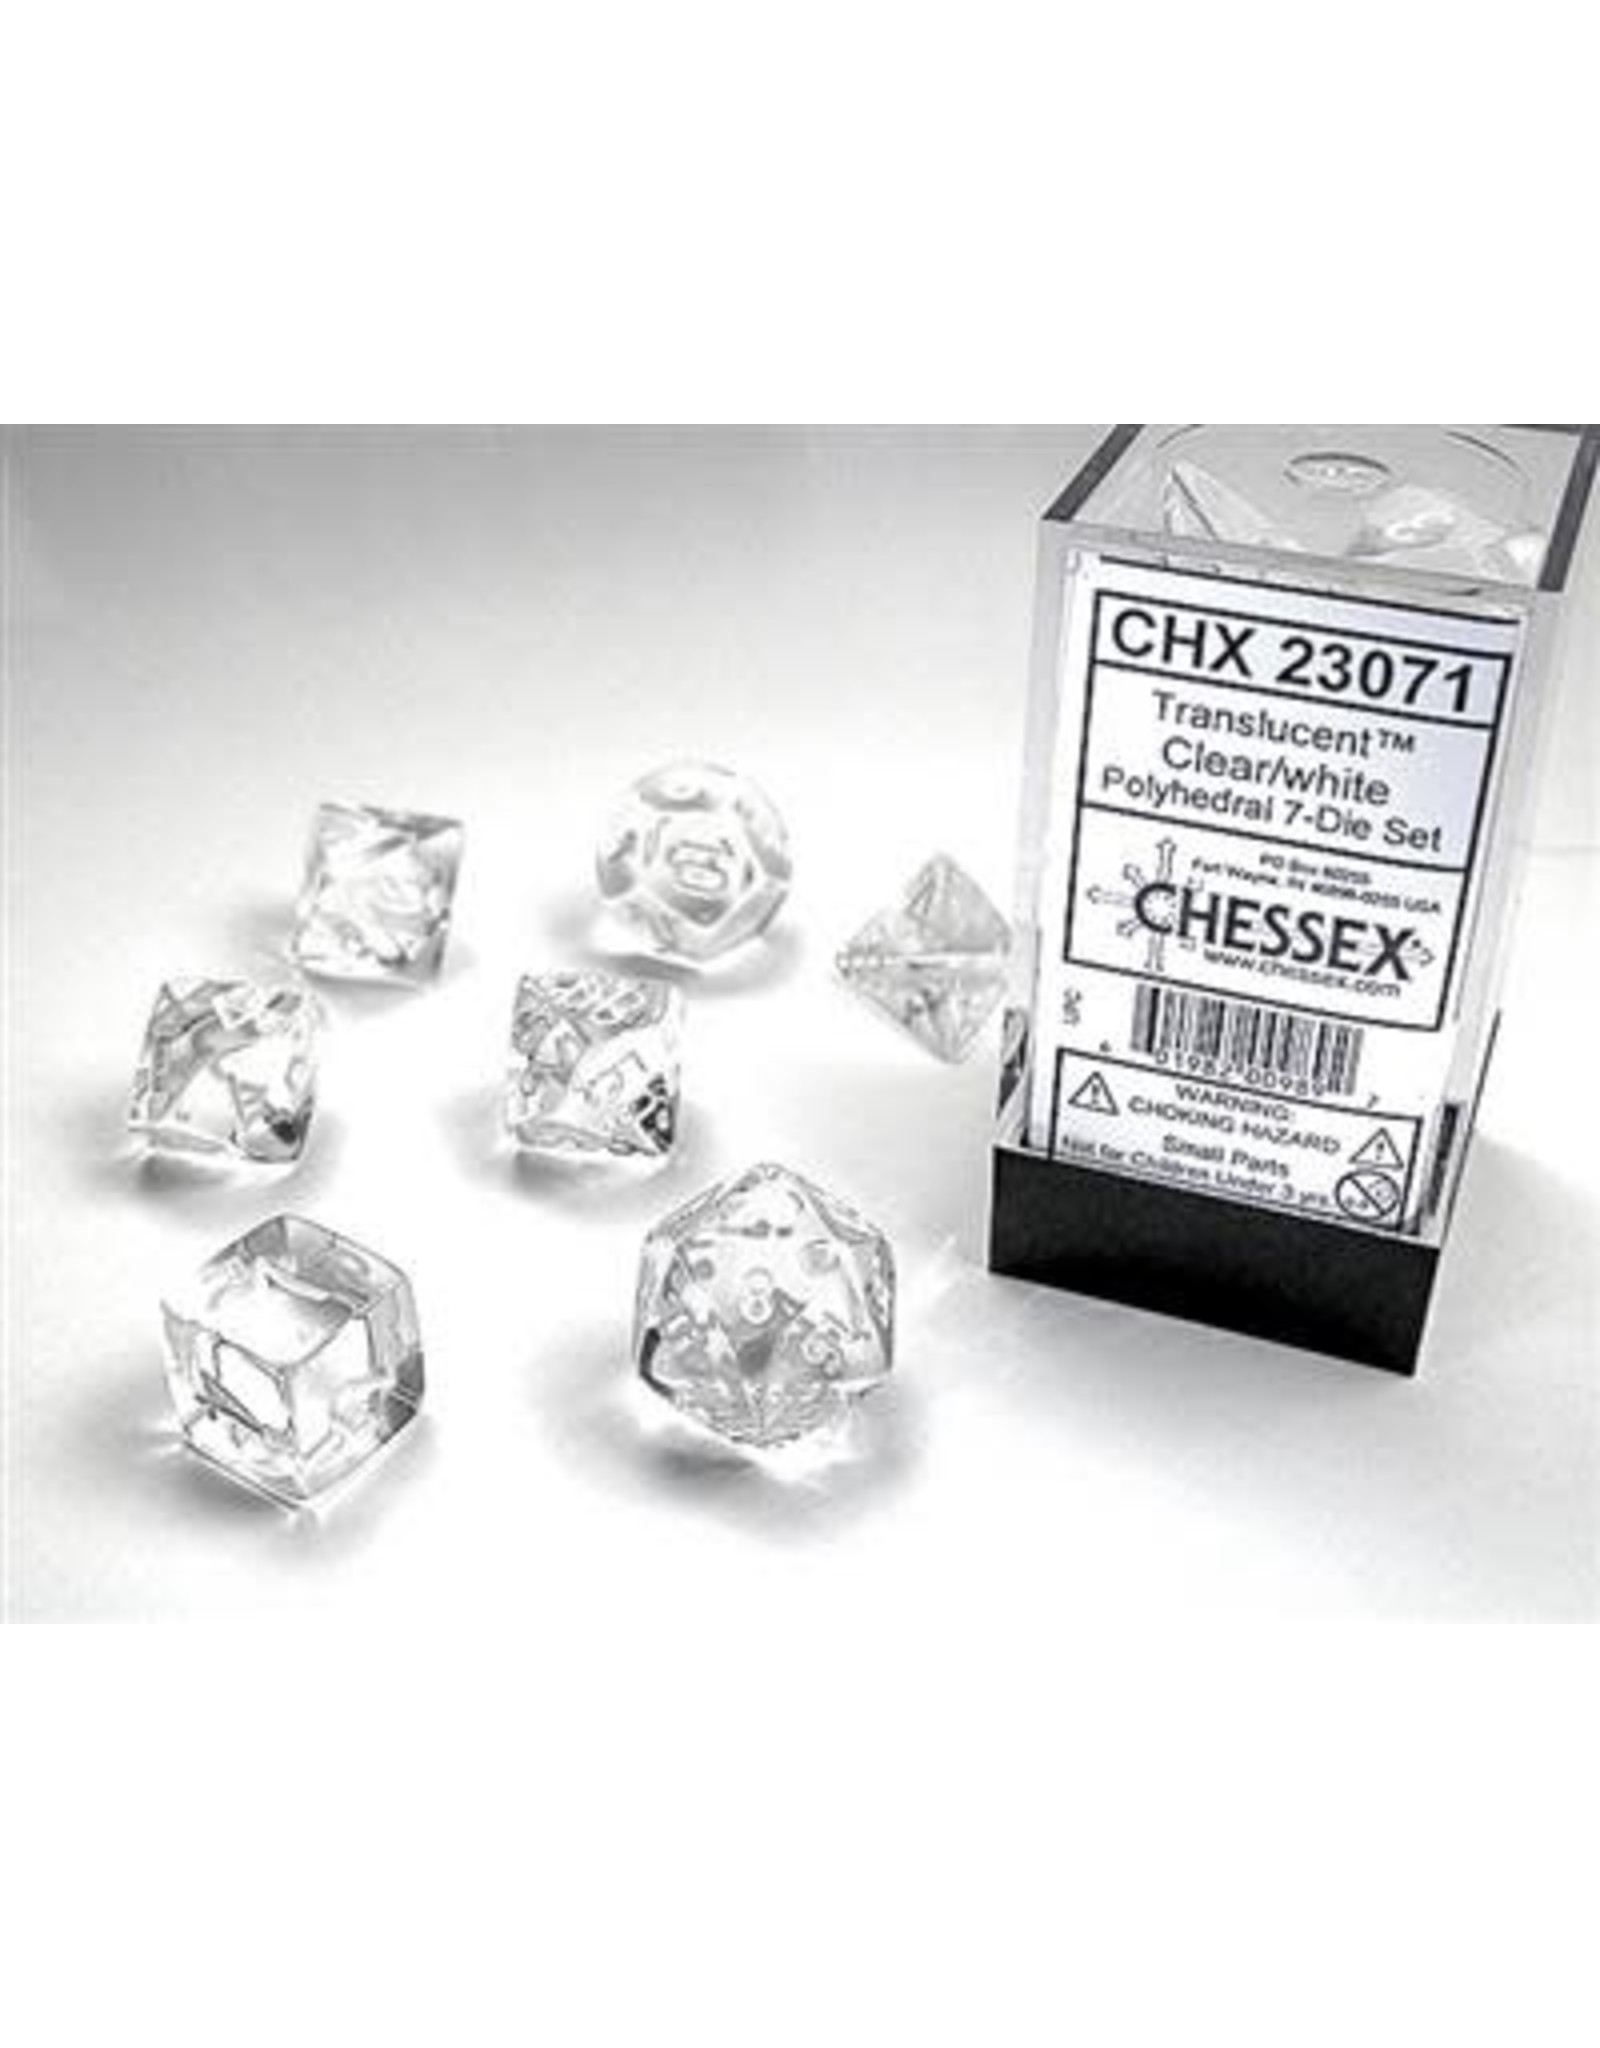 Chessex Chessex Translucent (7 pc Set) Clear/White